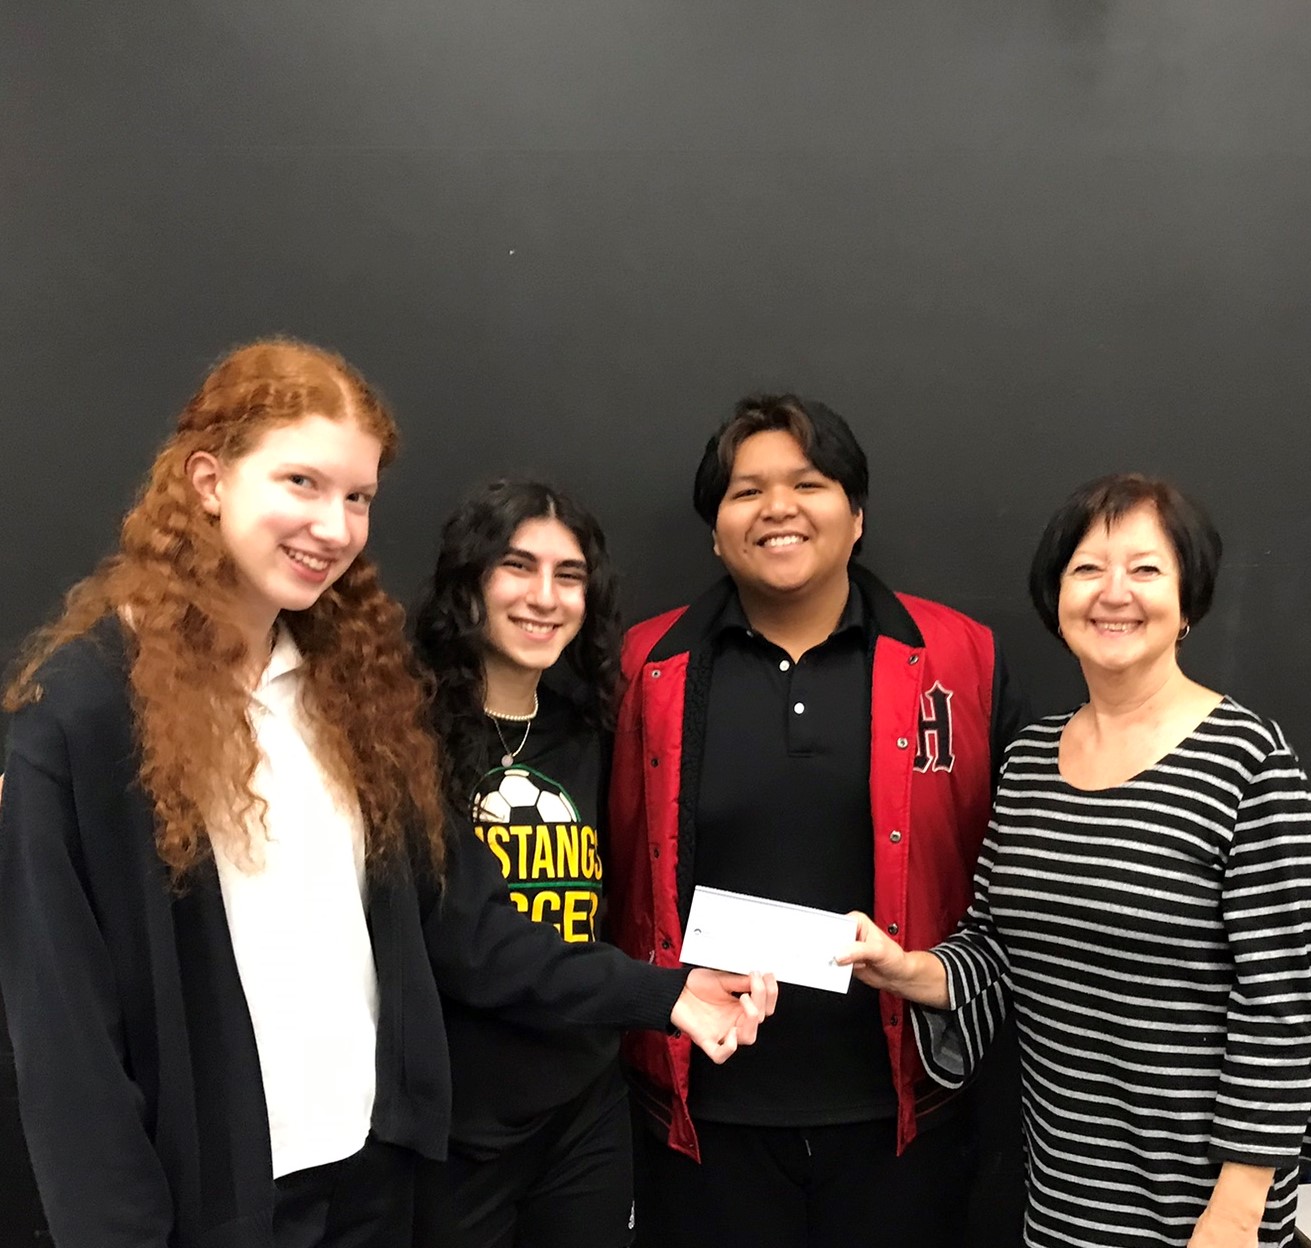 Immaculata Team presents prize money to Karen Barkman, Provision of Hope. We have already started the first project that this money was designated for. How exciting!